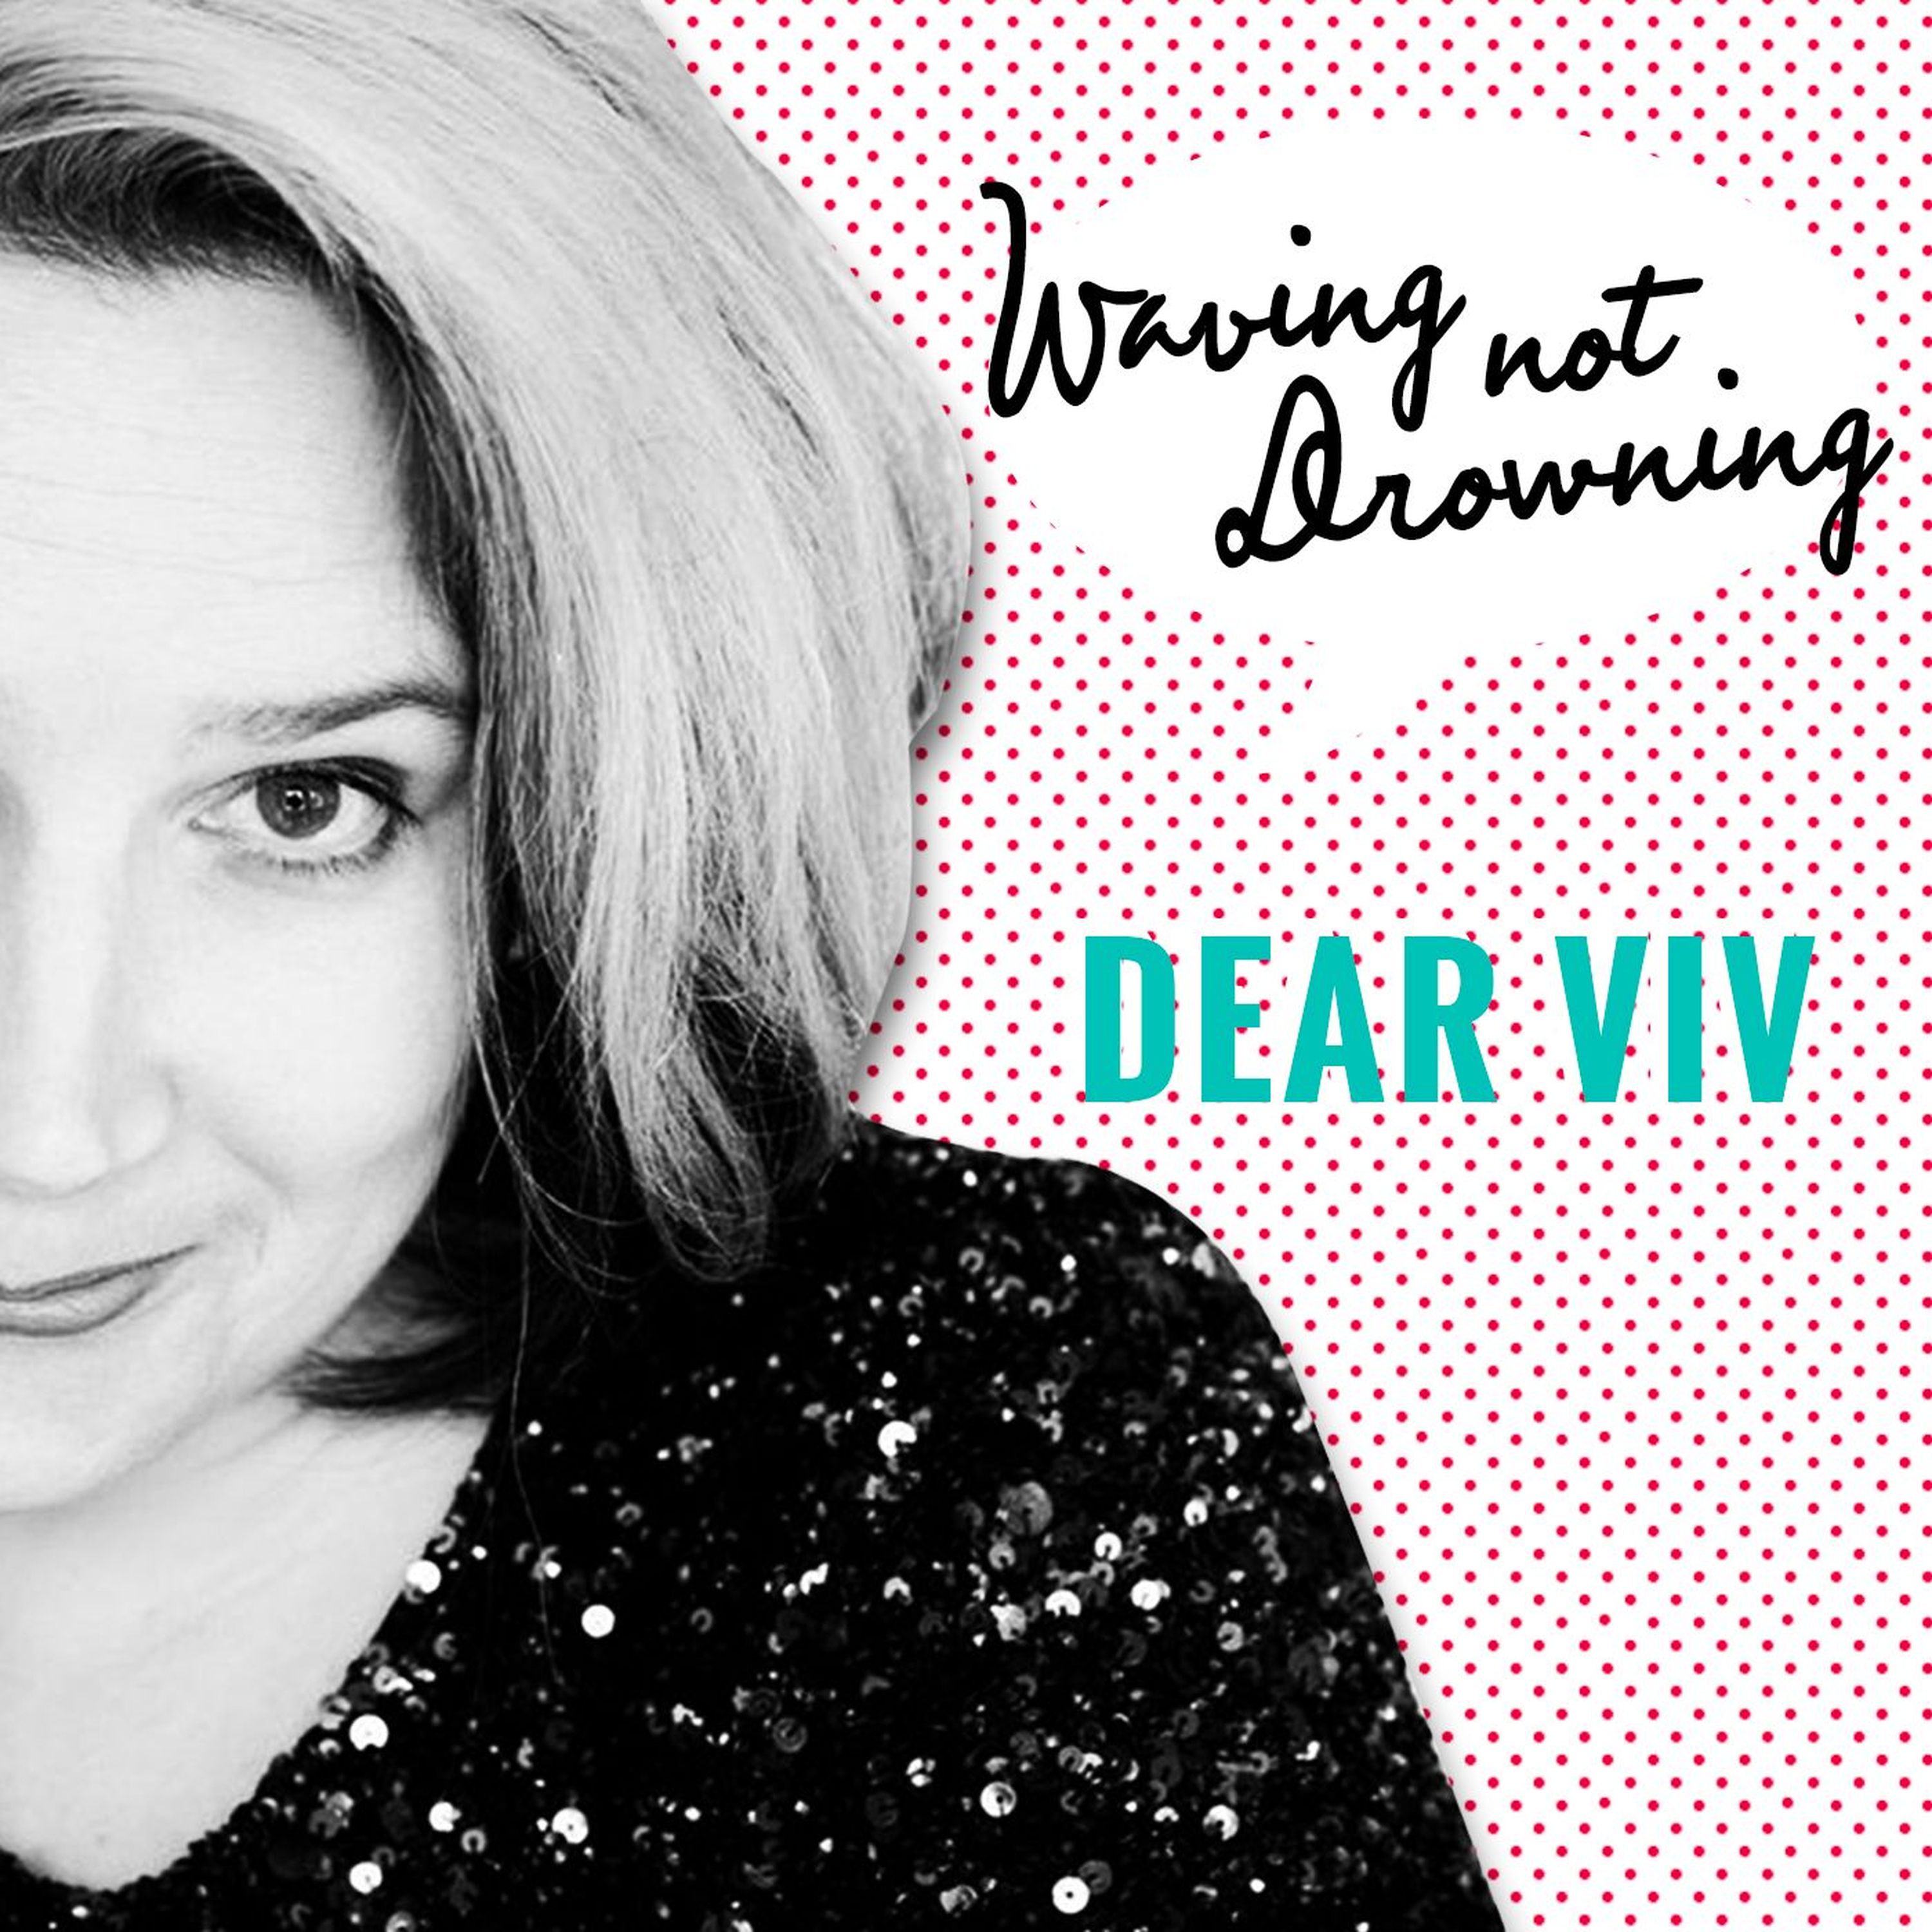 Dear Viv: He's finally faced his drink problem - but it's too late